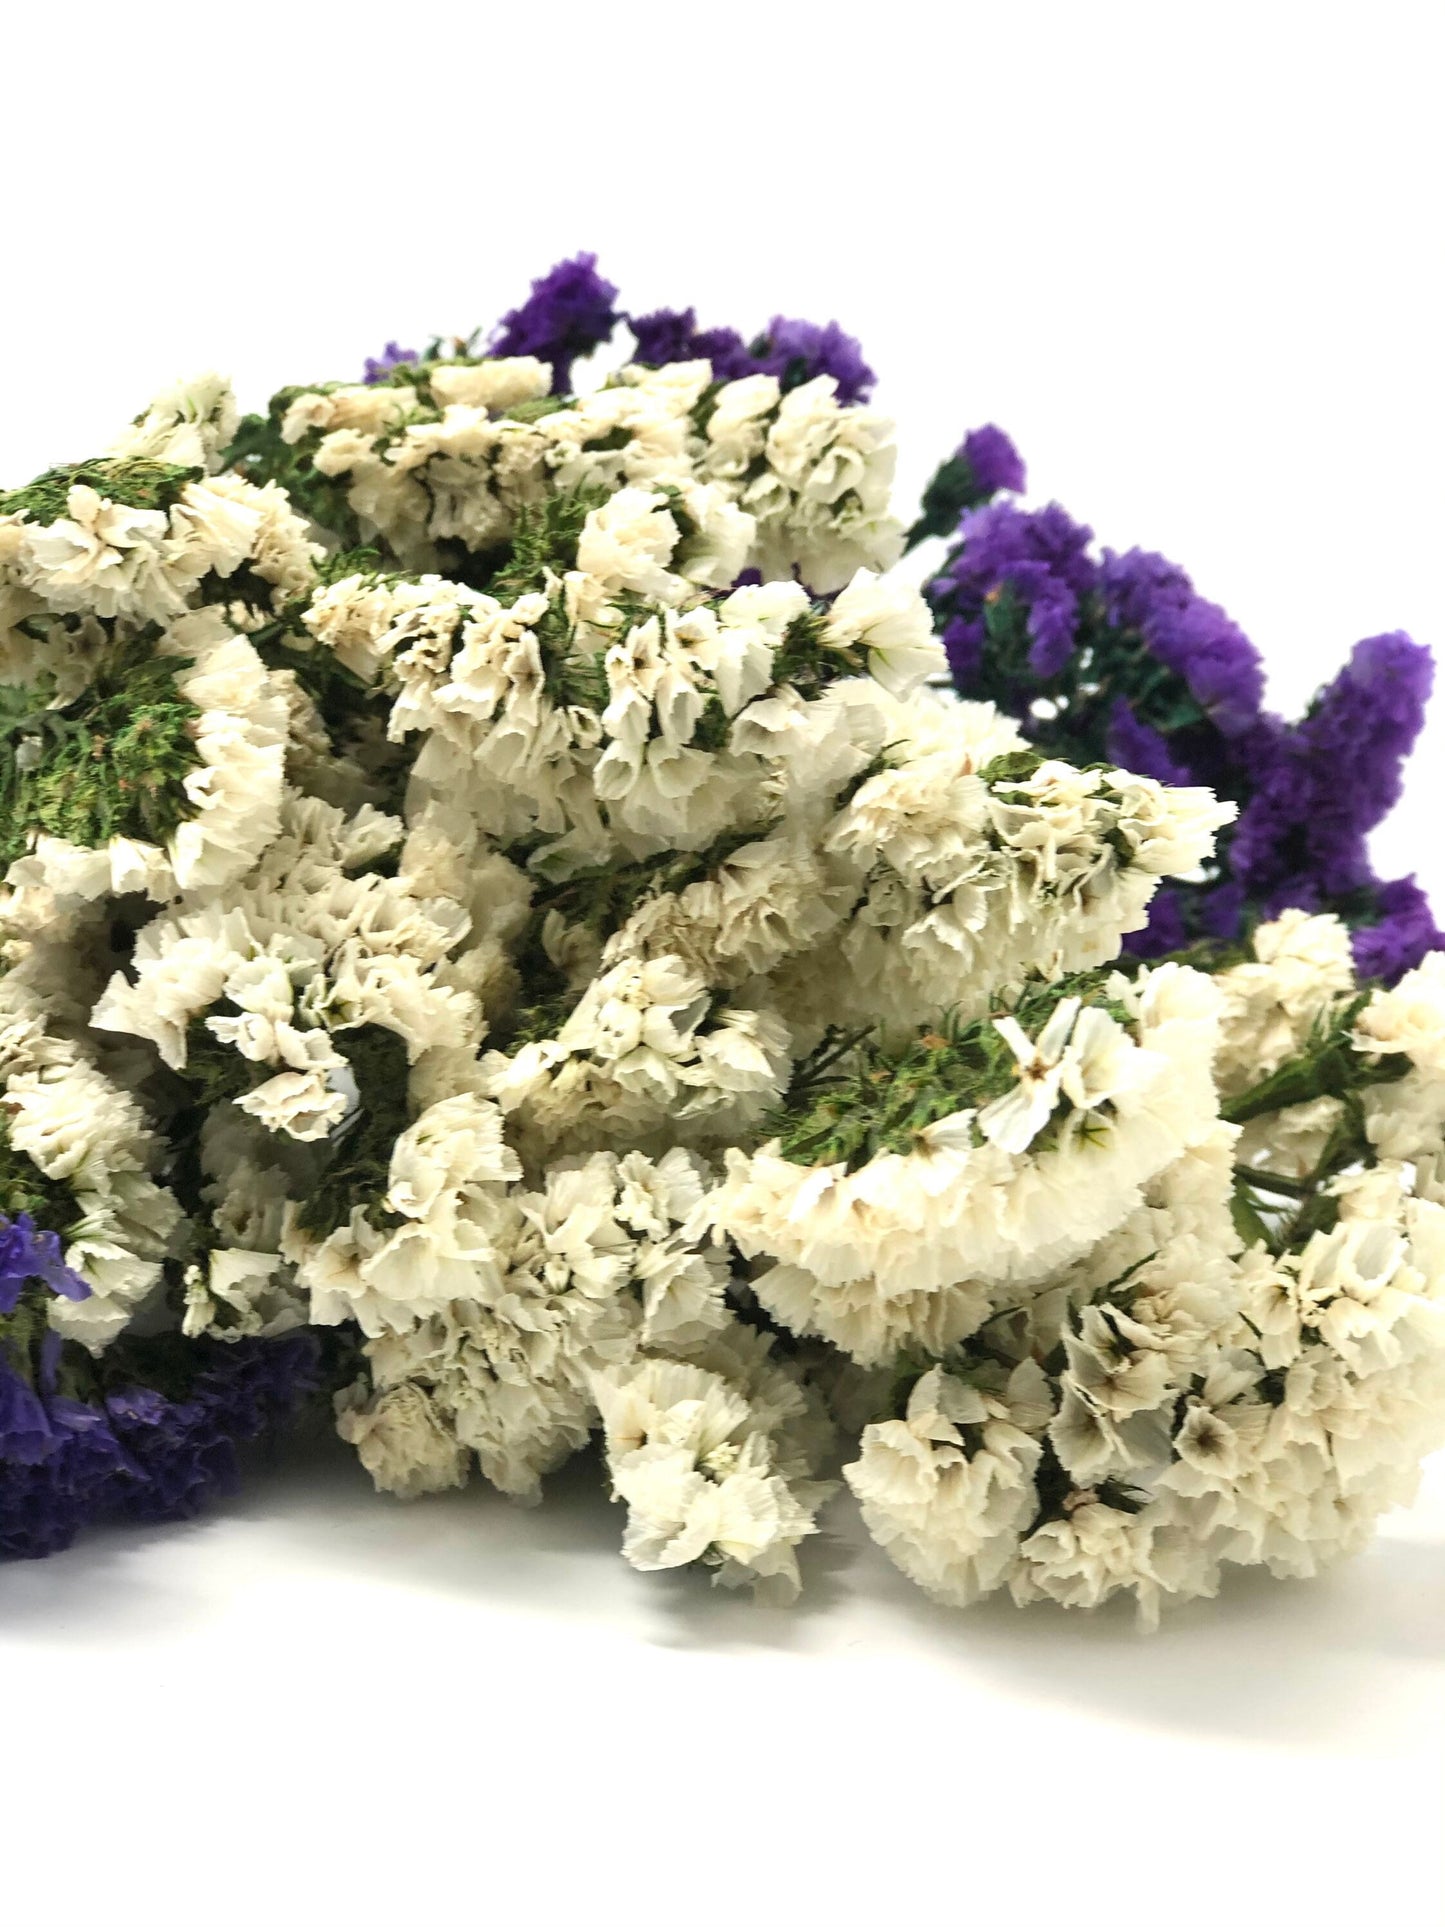 Sinuata Statice, Limonium Sinuatum, Pink, Rose, Blue Statice, Blue, White, Dried, Preserved Flowers Real Flowers Wedding Flowers Bouquet